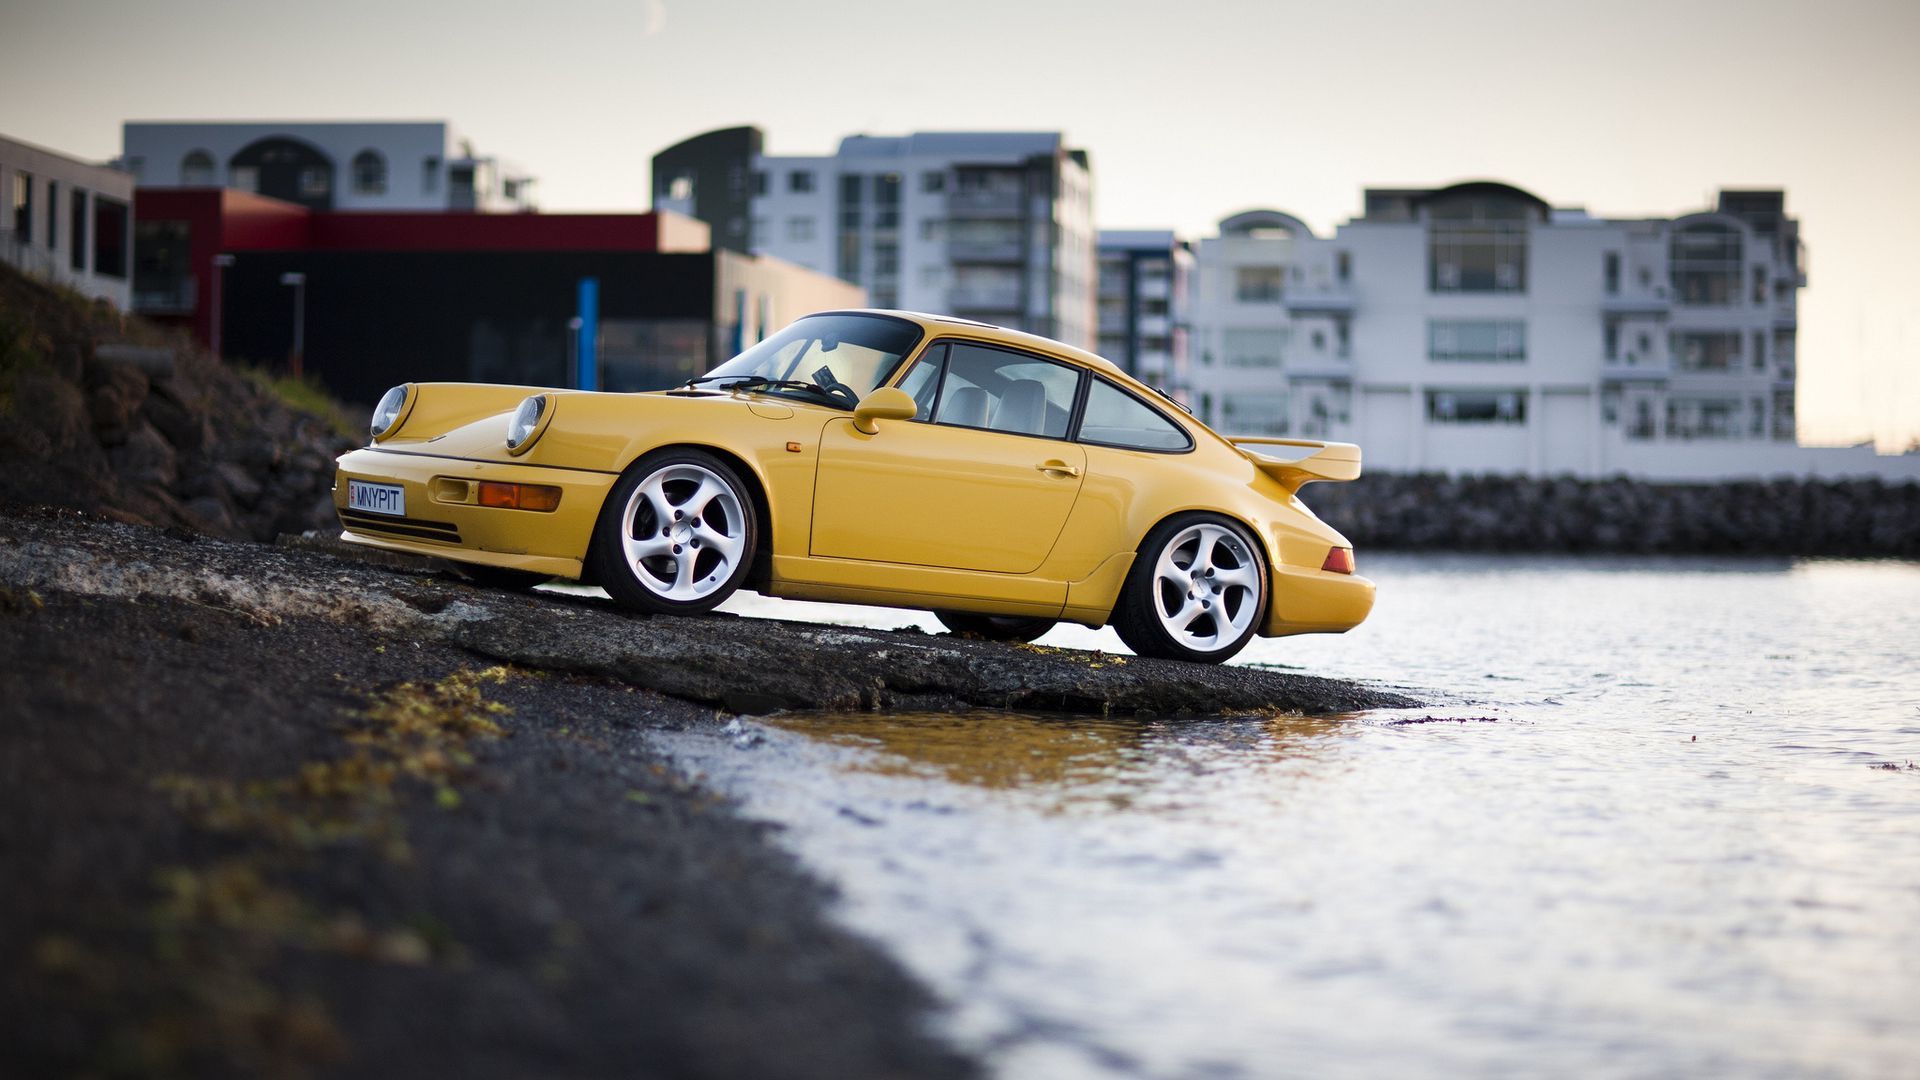 Download wallpaper 1920x1080 supercharged, carrera yellow